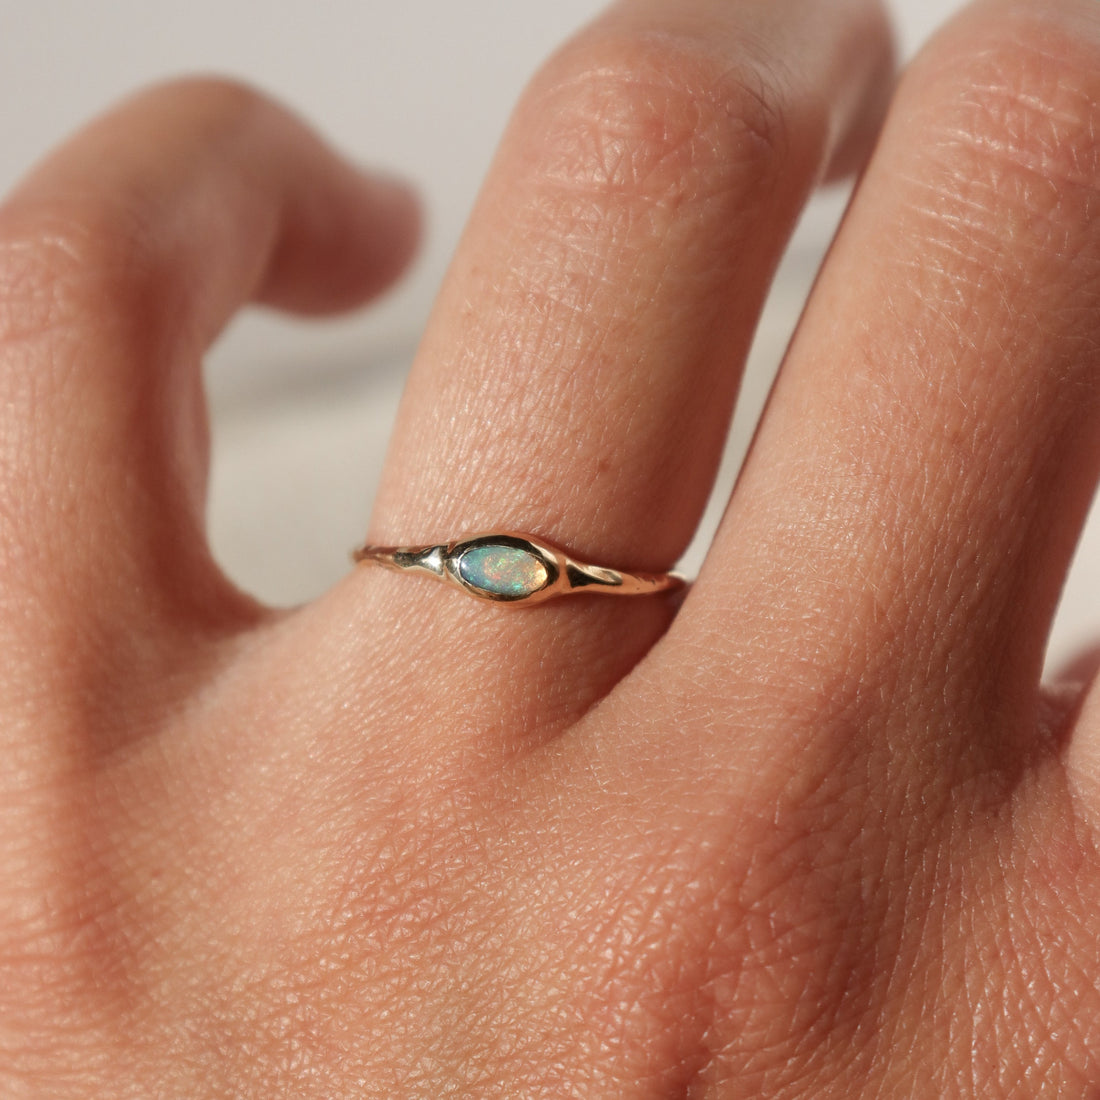 A tiny oval opal is  bezel set  in  14k gold on a narrow band.